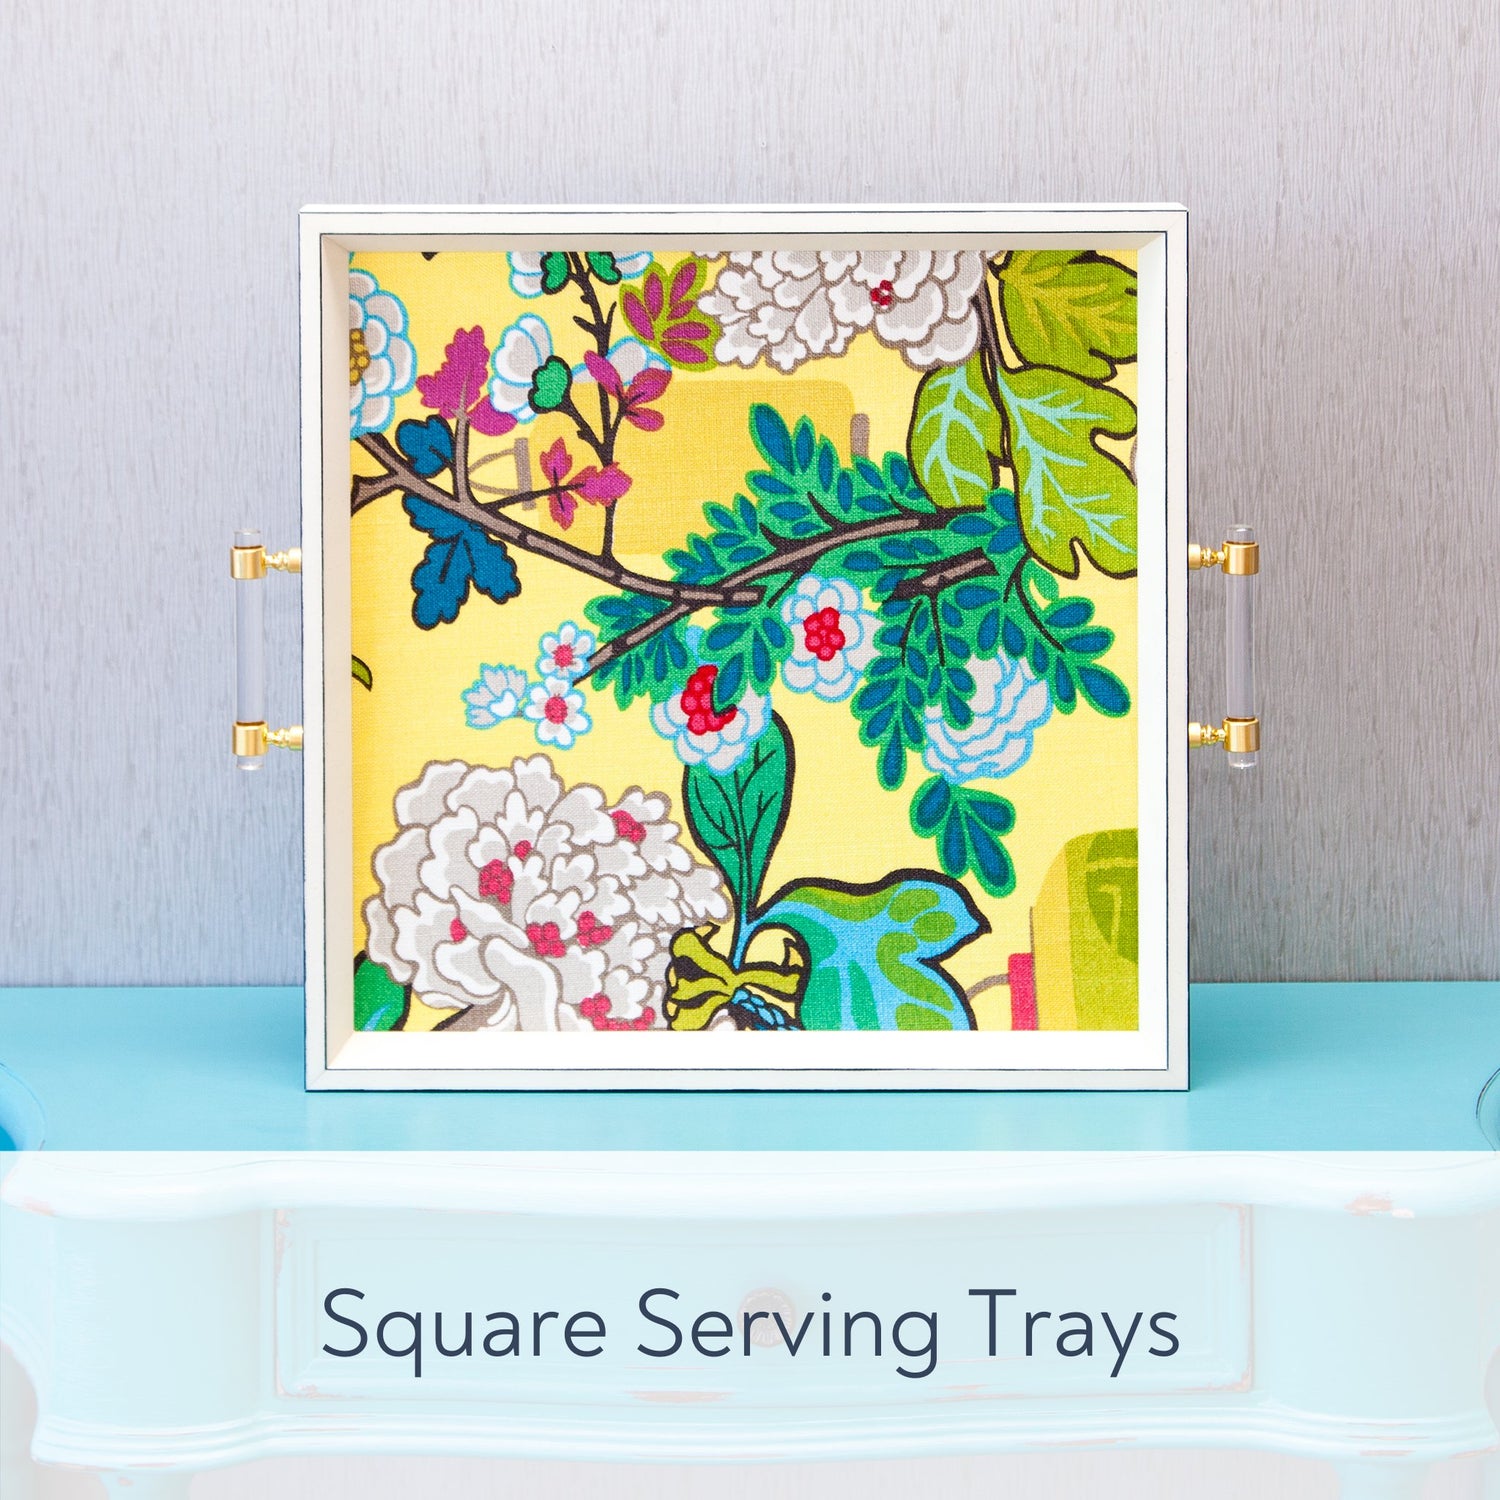 Square Serving Trays